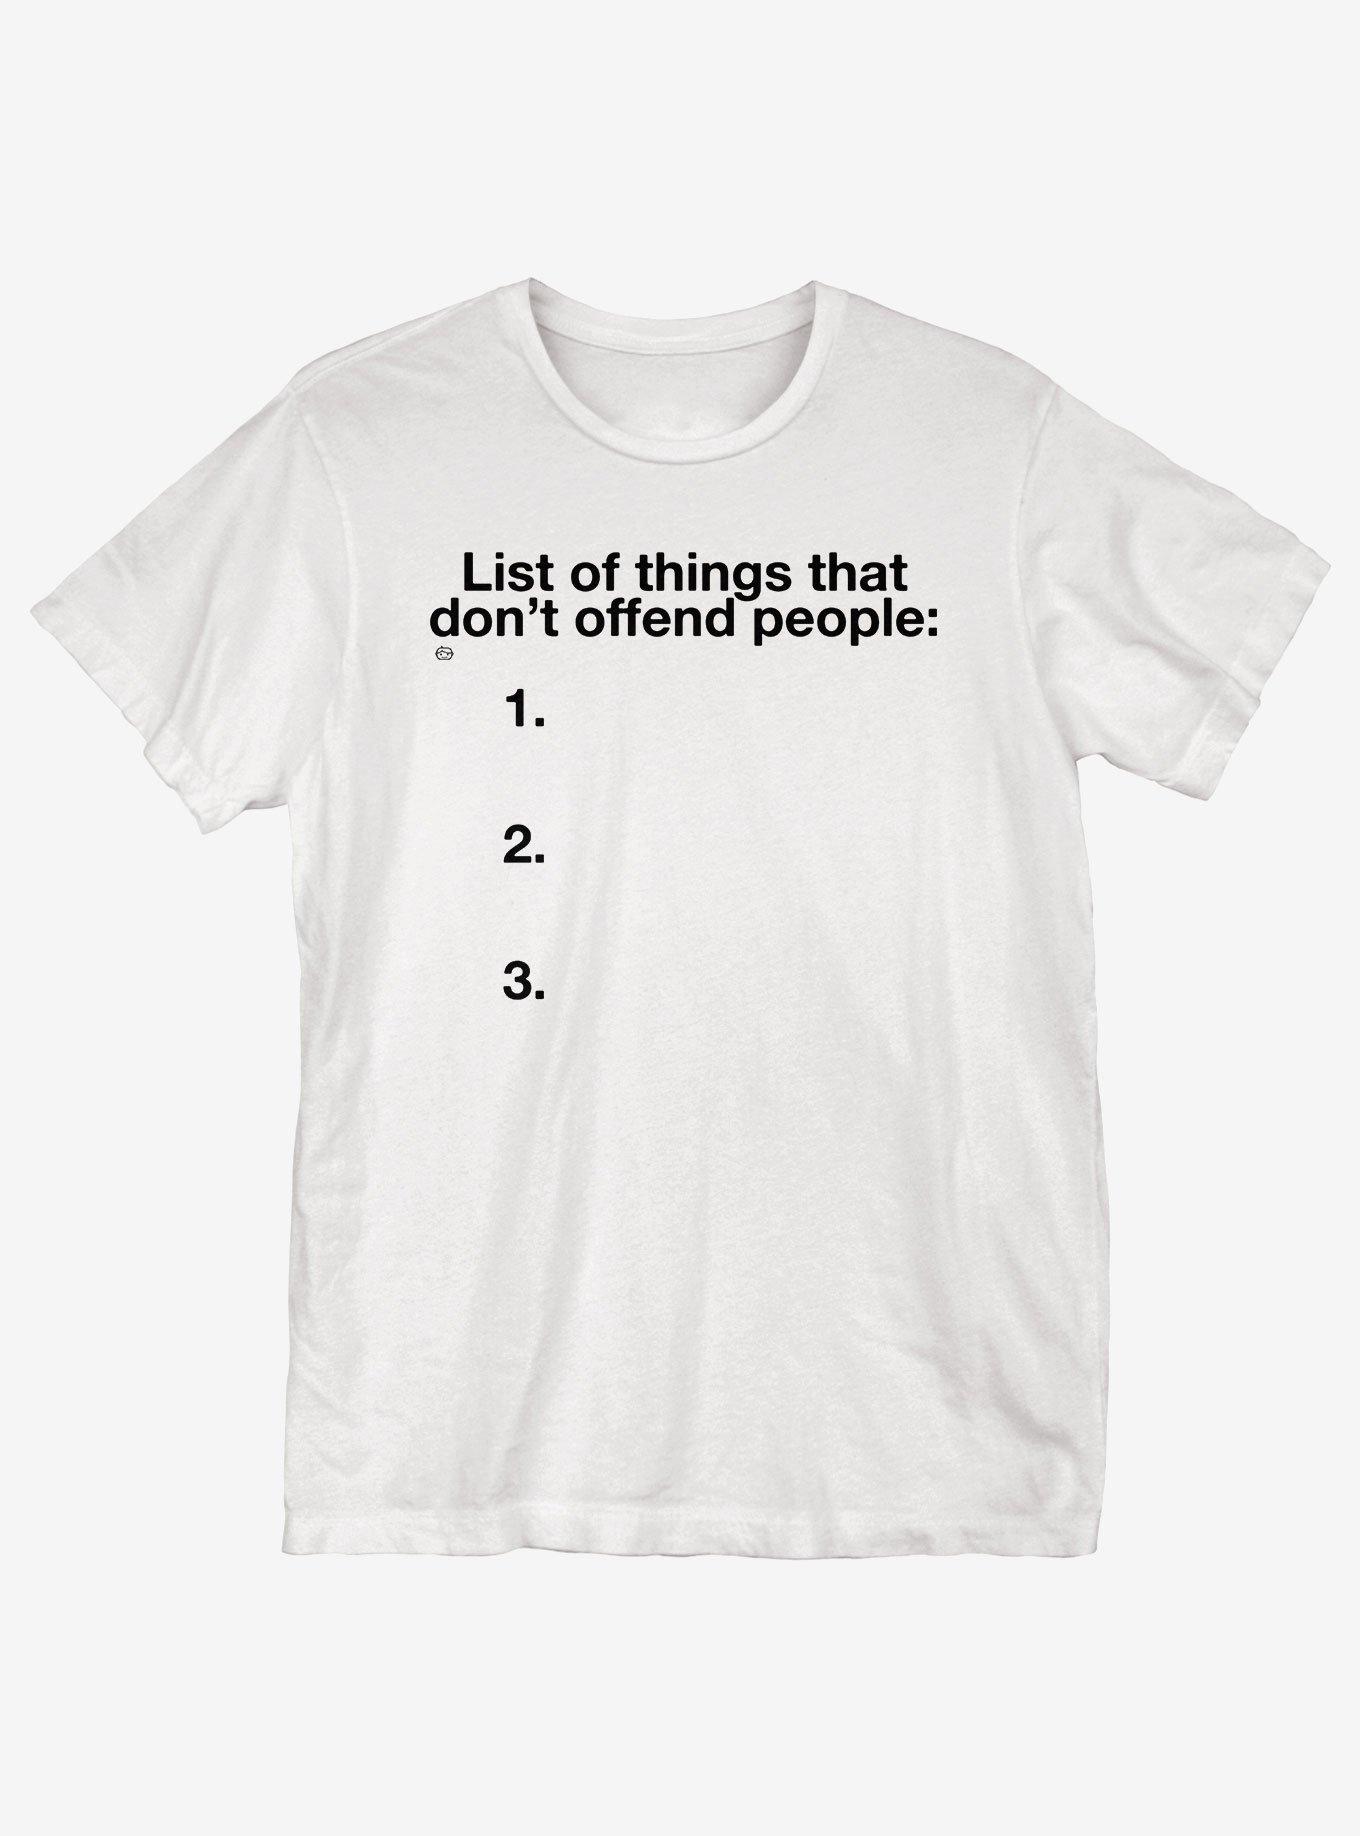 List Of Things That Don't Offend T-Shirt, WHITE, hi-res